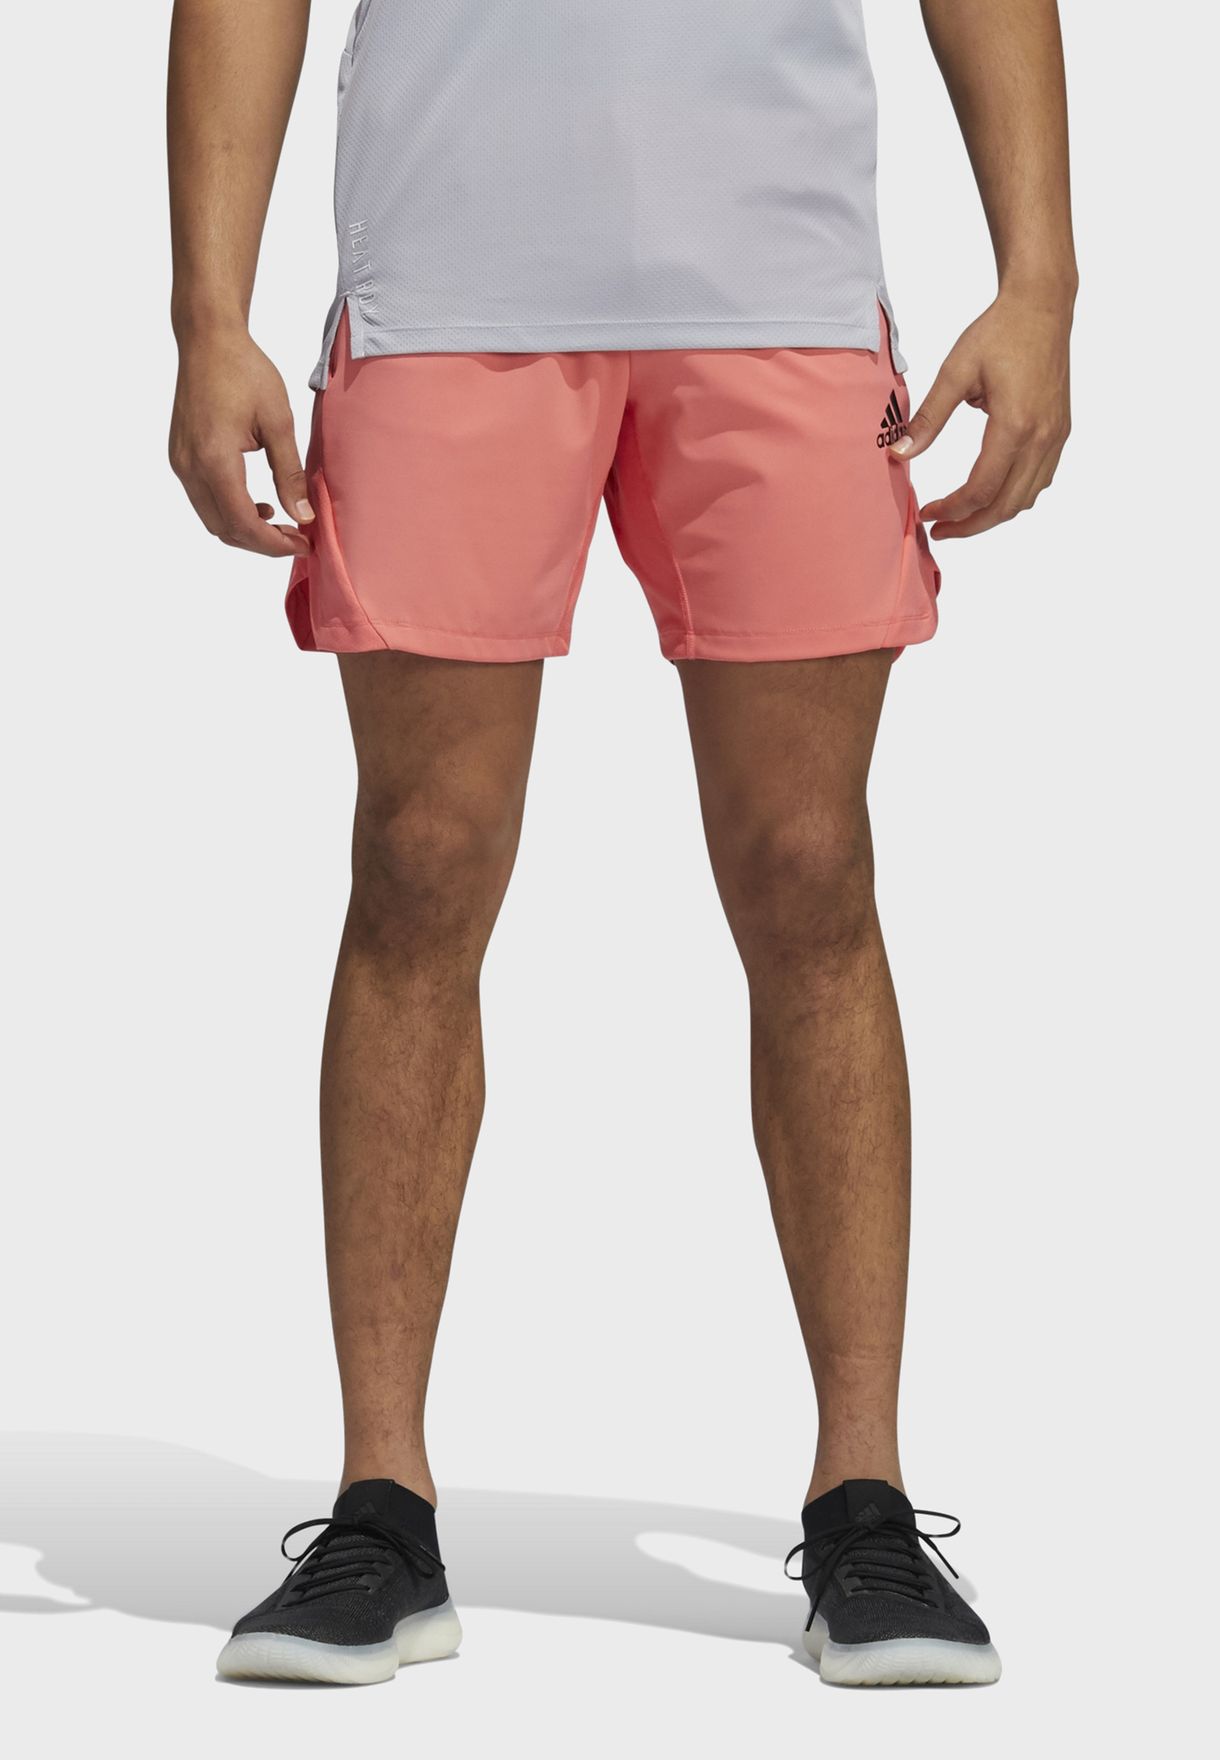 Buy adidas pink Heat Ready Shorts for 